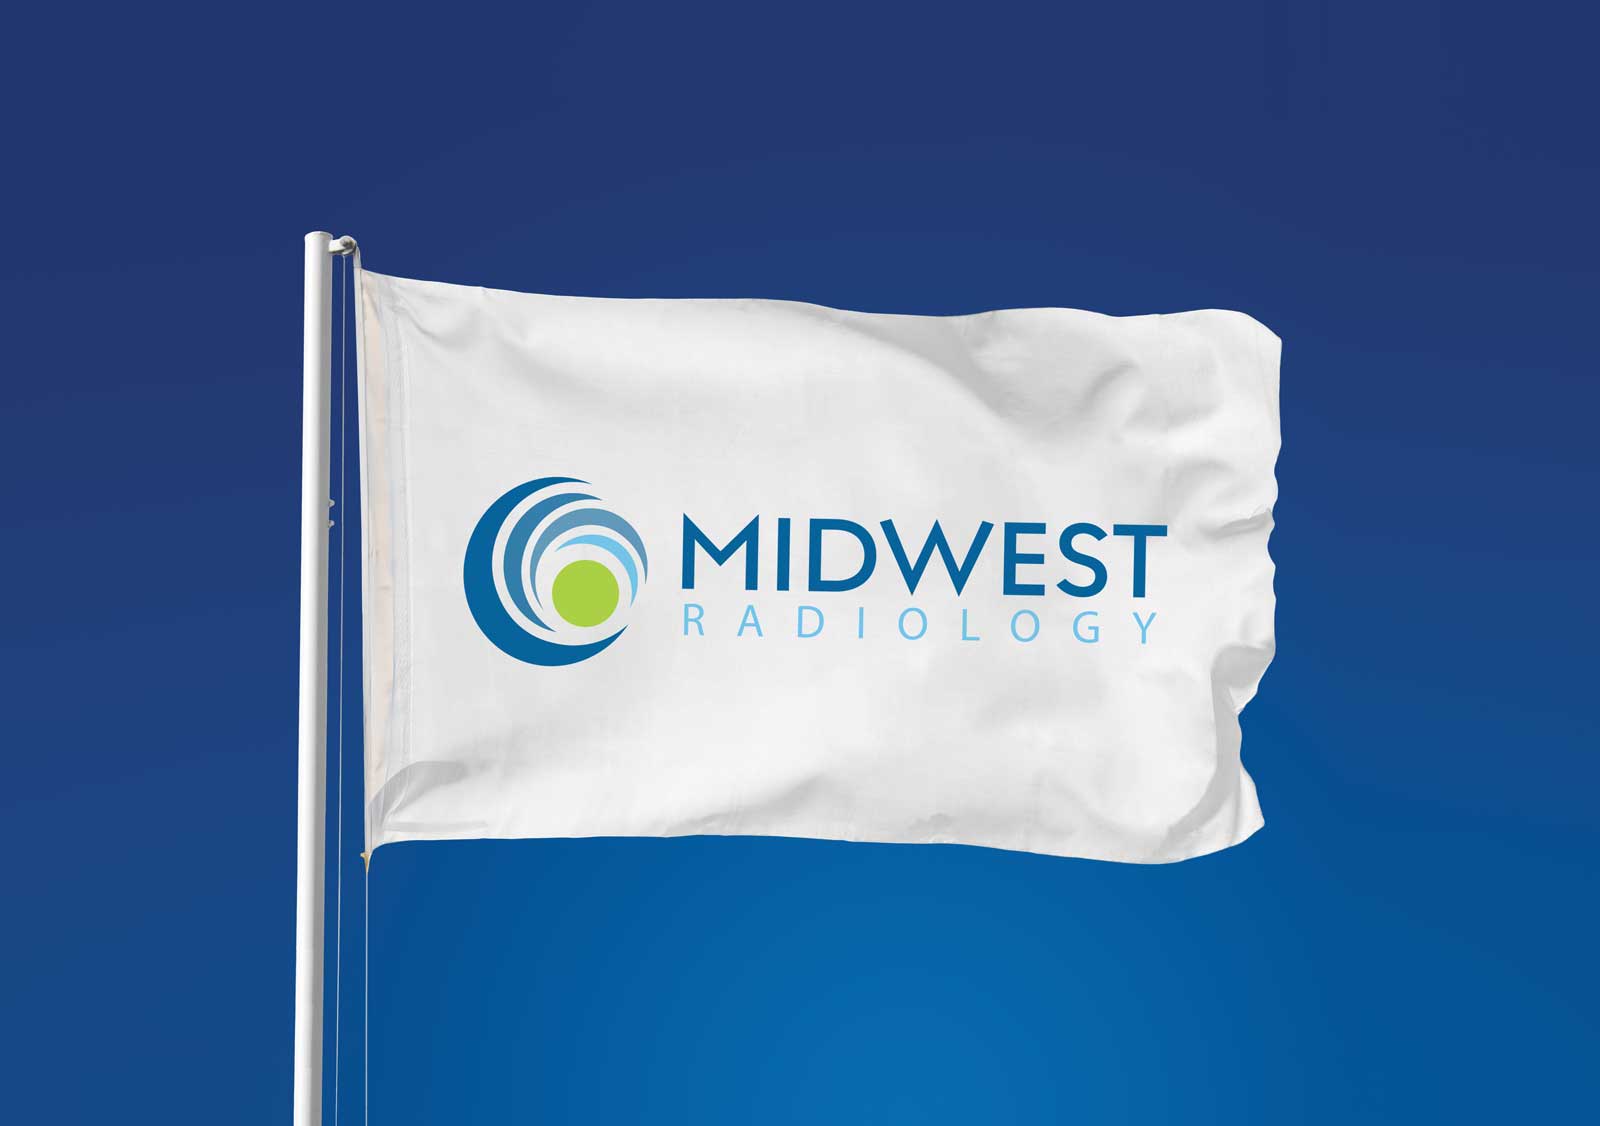 Clinics Combine to Form Midwest Radiology Outpatient Imaging Network